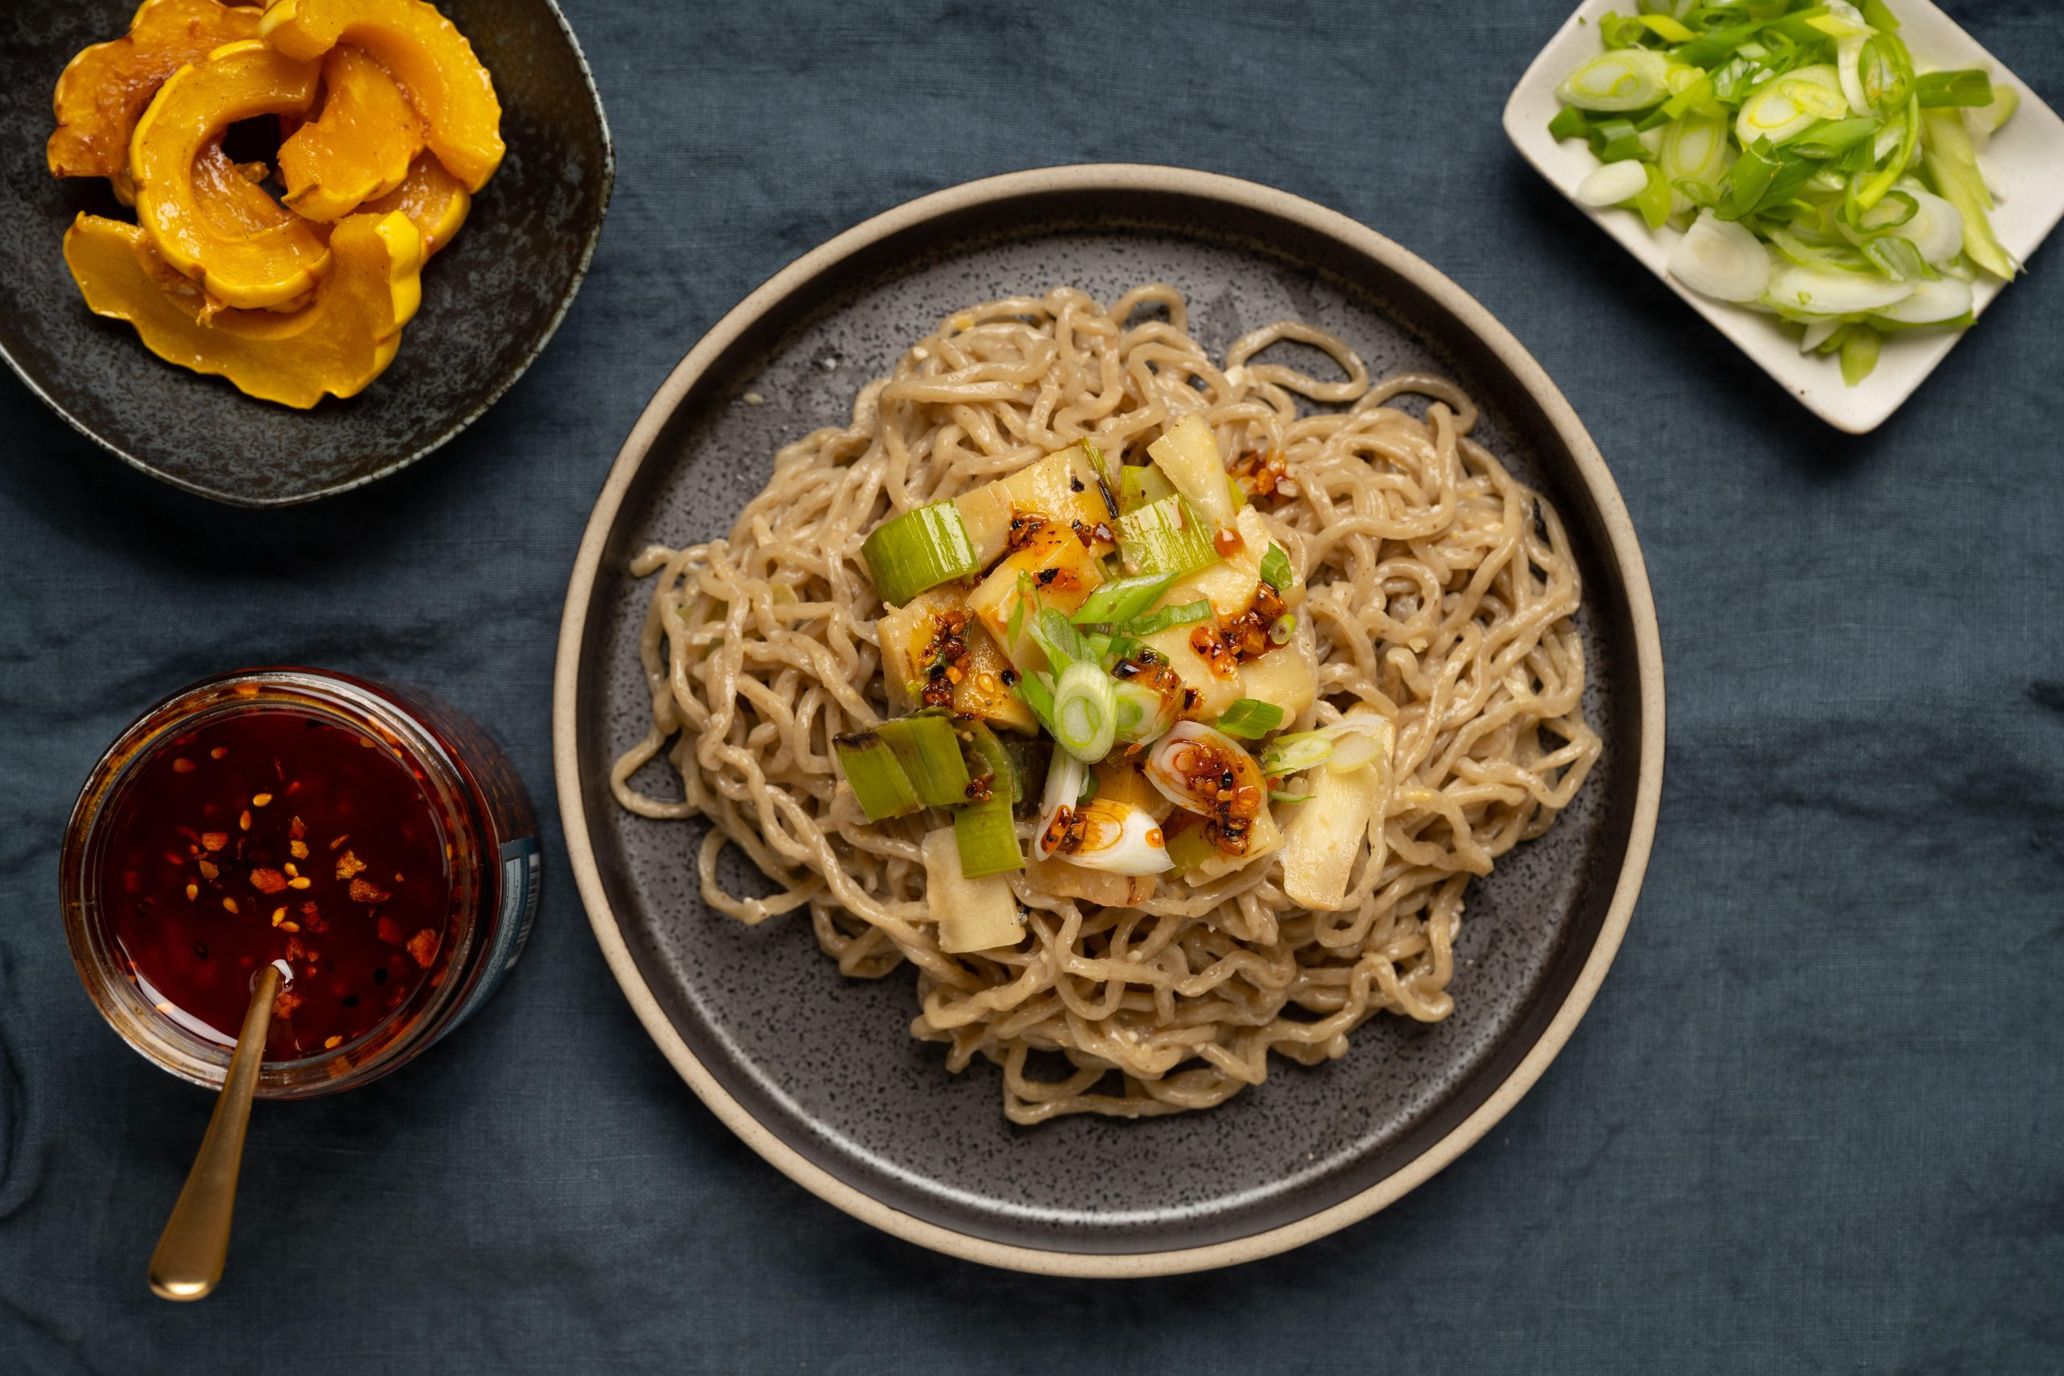 The recipe for Jorinji Miso’s cream miso pasta, given to Portland noodle maker Umi Organic, is a hit even among those who don’t love ramen.
Photography Shawn Linehan